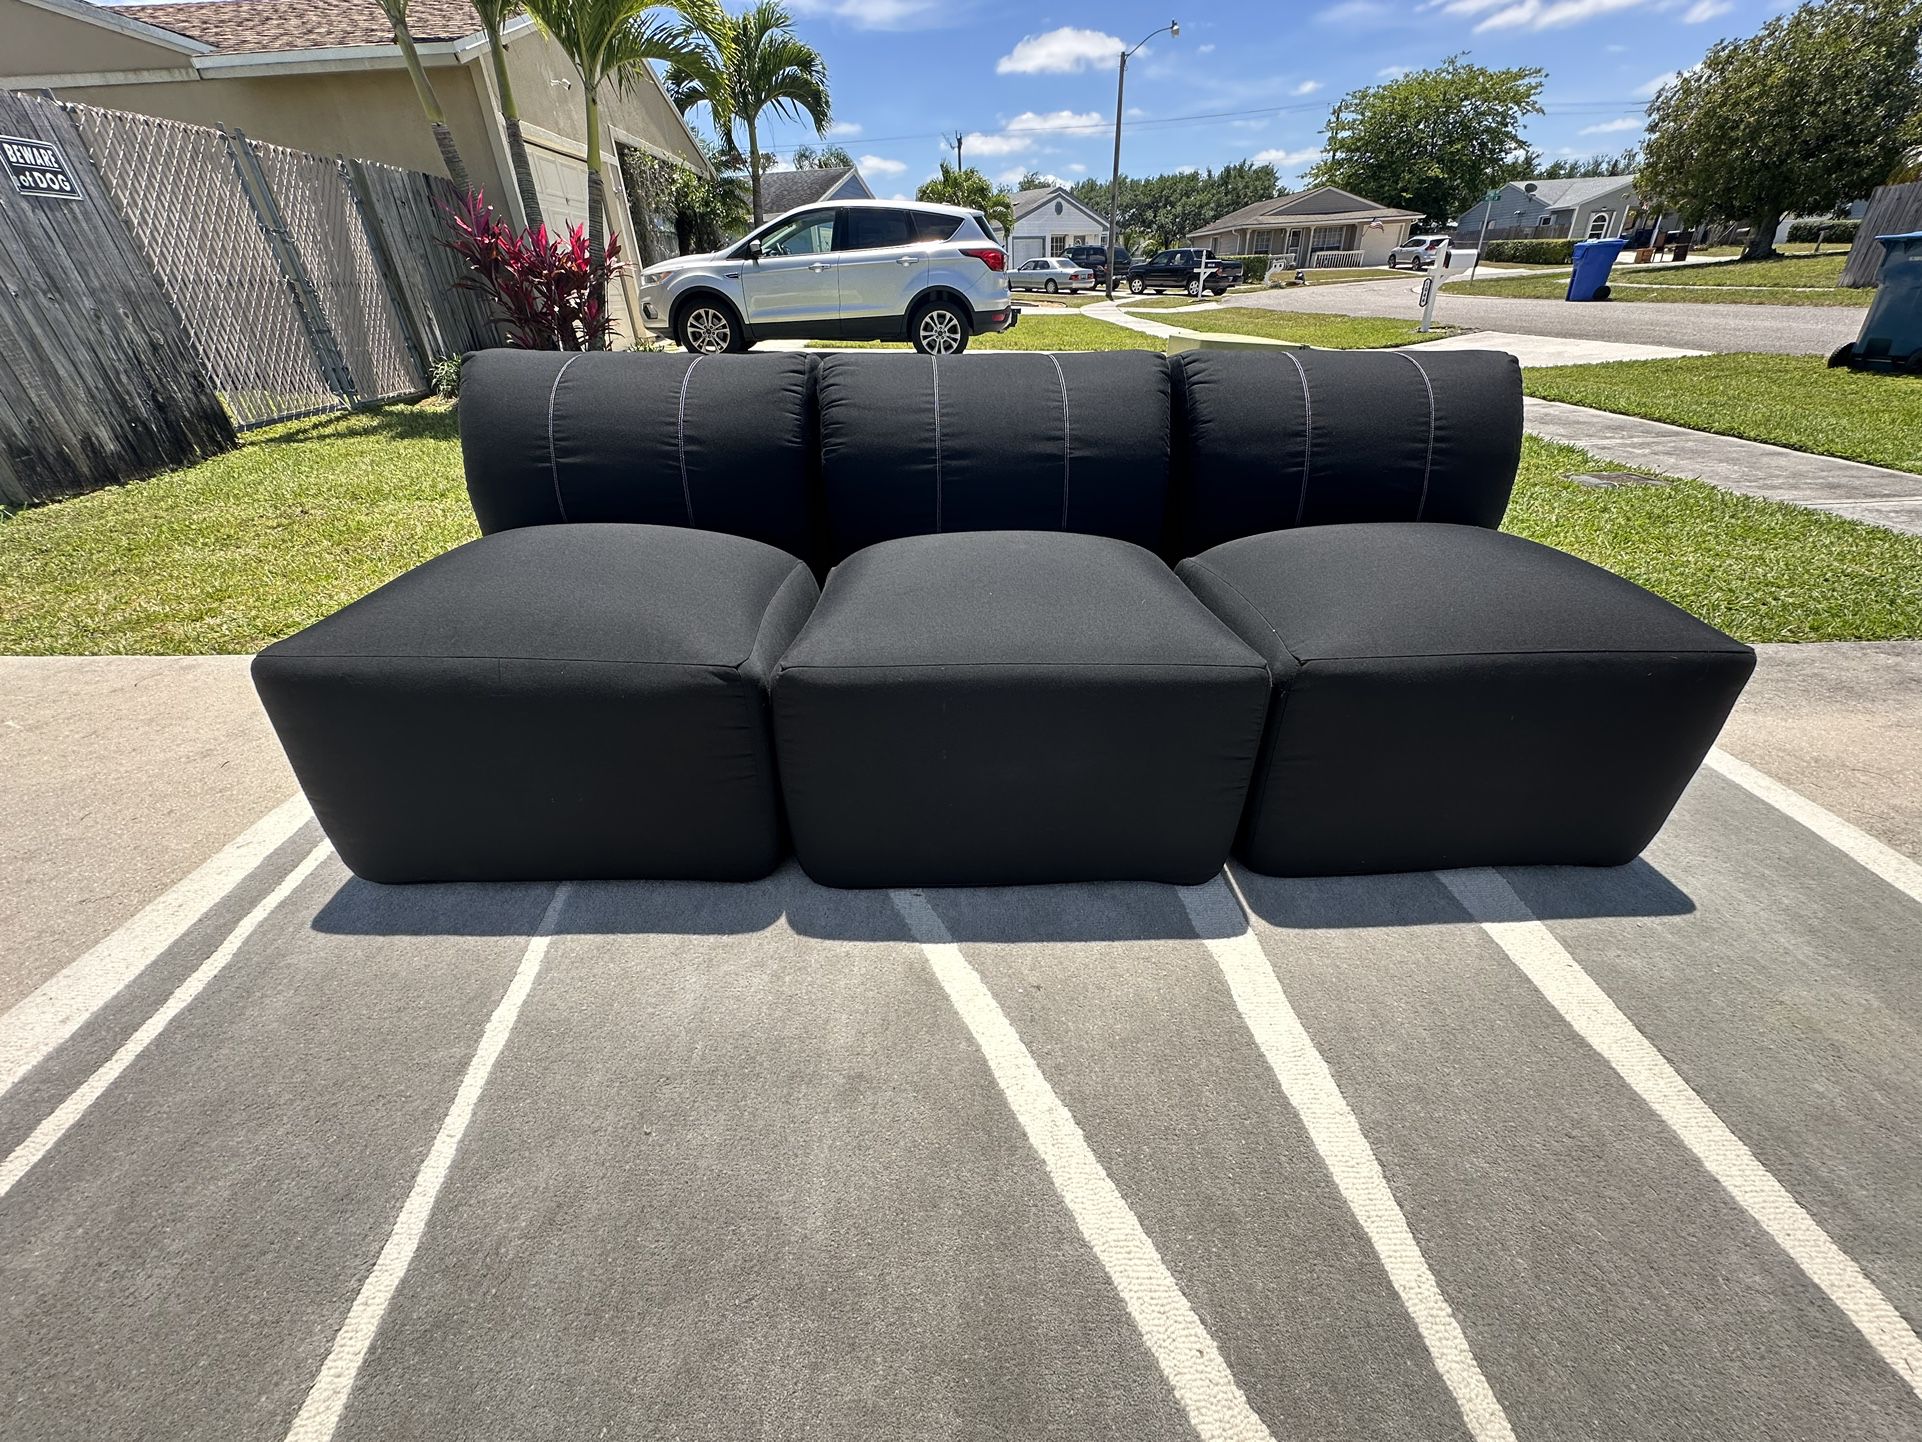 Black Modular Couch Or Chairs Free Delivery 